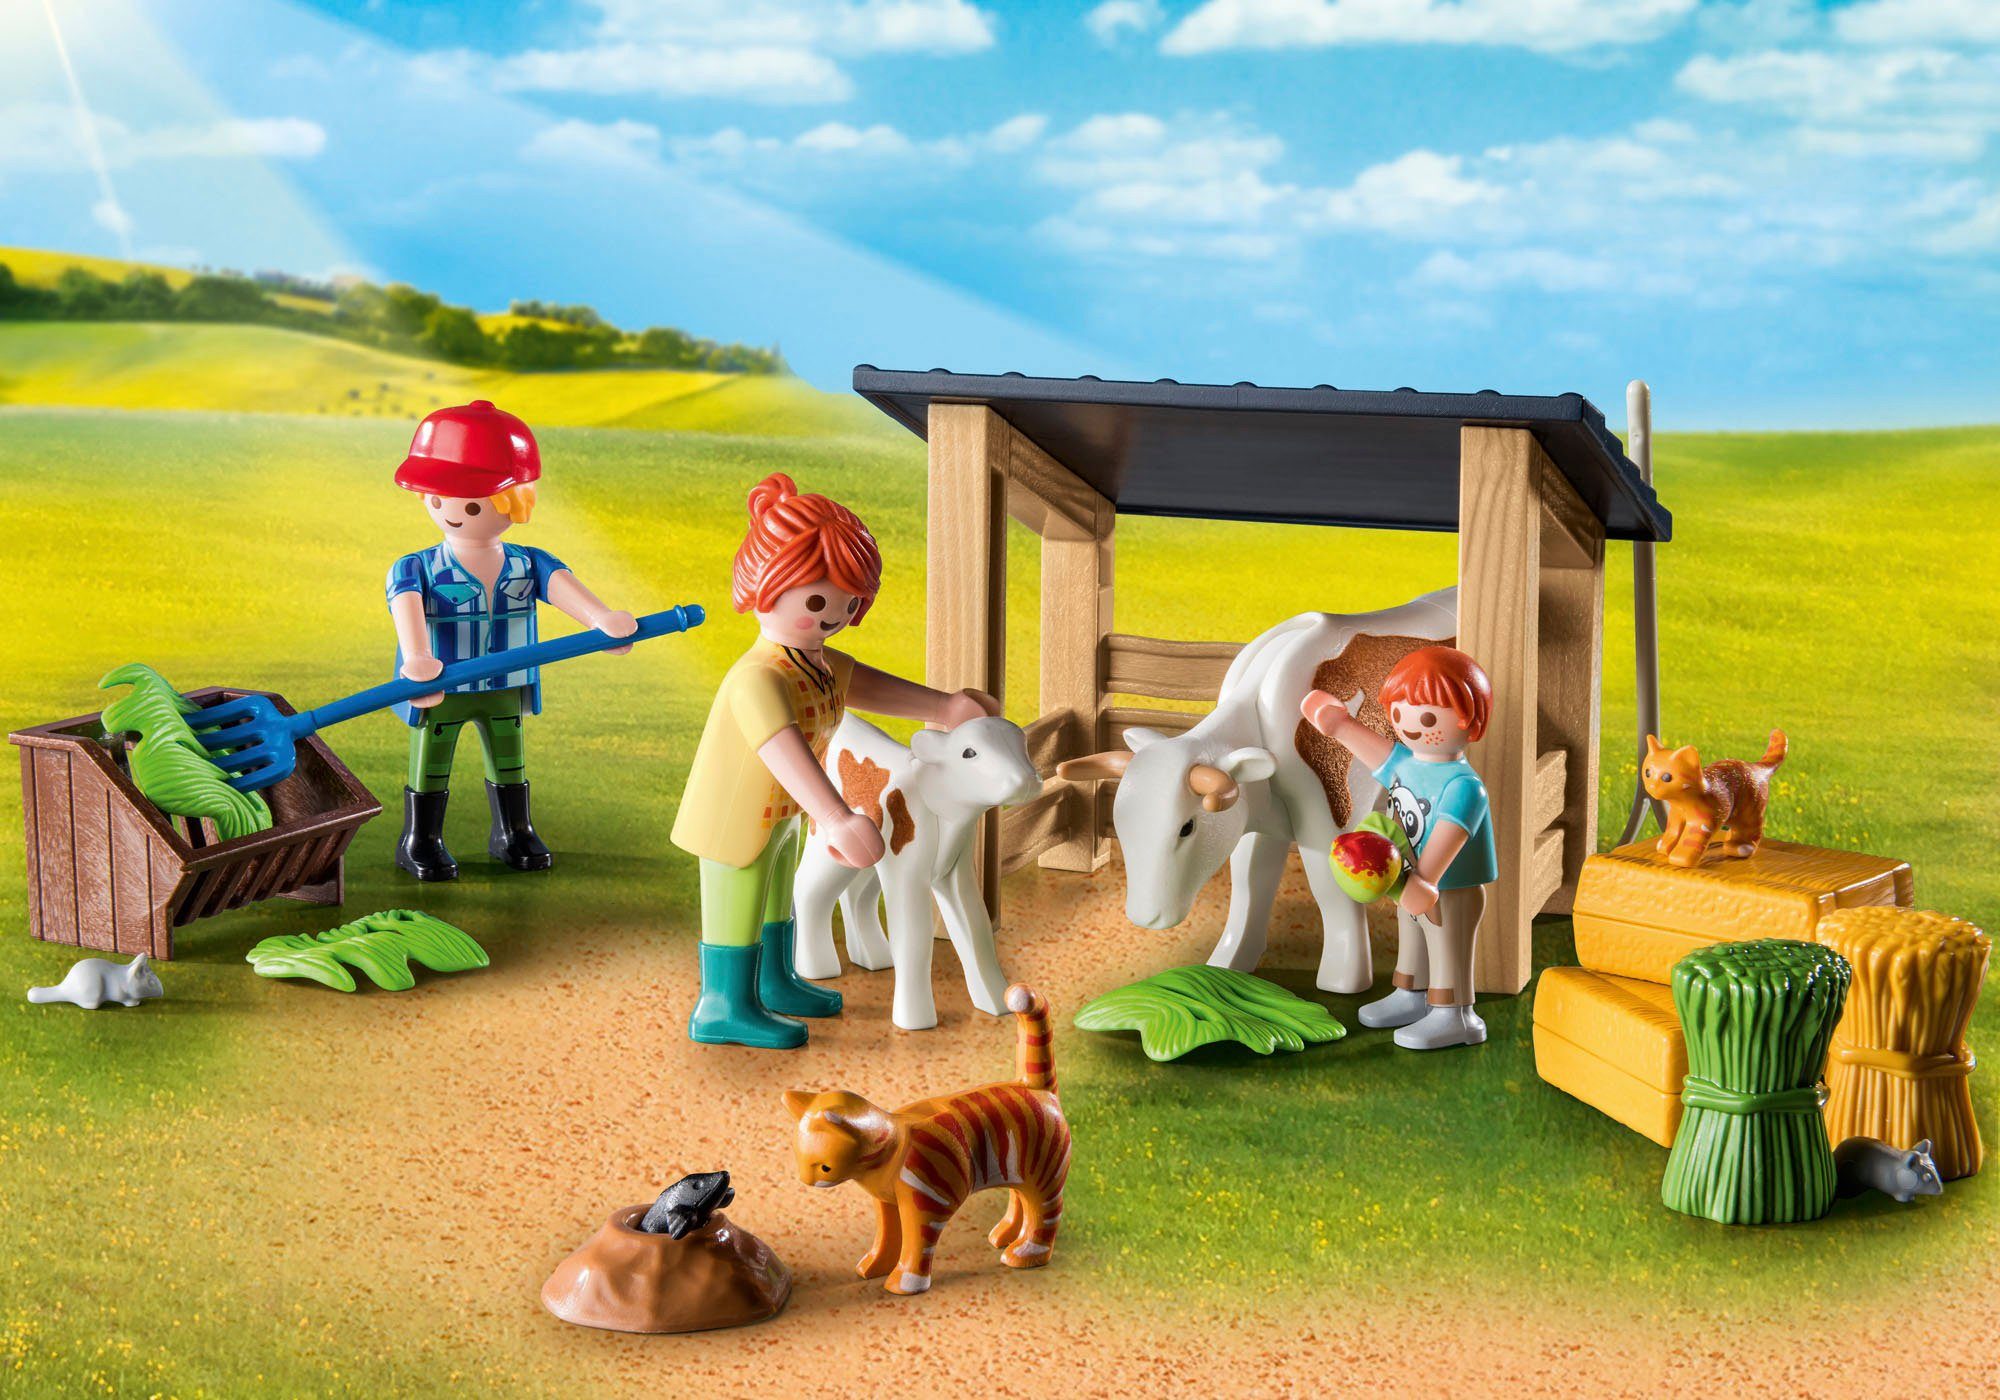 Playmobil® Konstruktions-Spielset Bauernhaus (71248), teilweise Material; Made recyceltem aus in Country, Germany